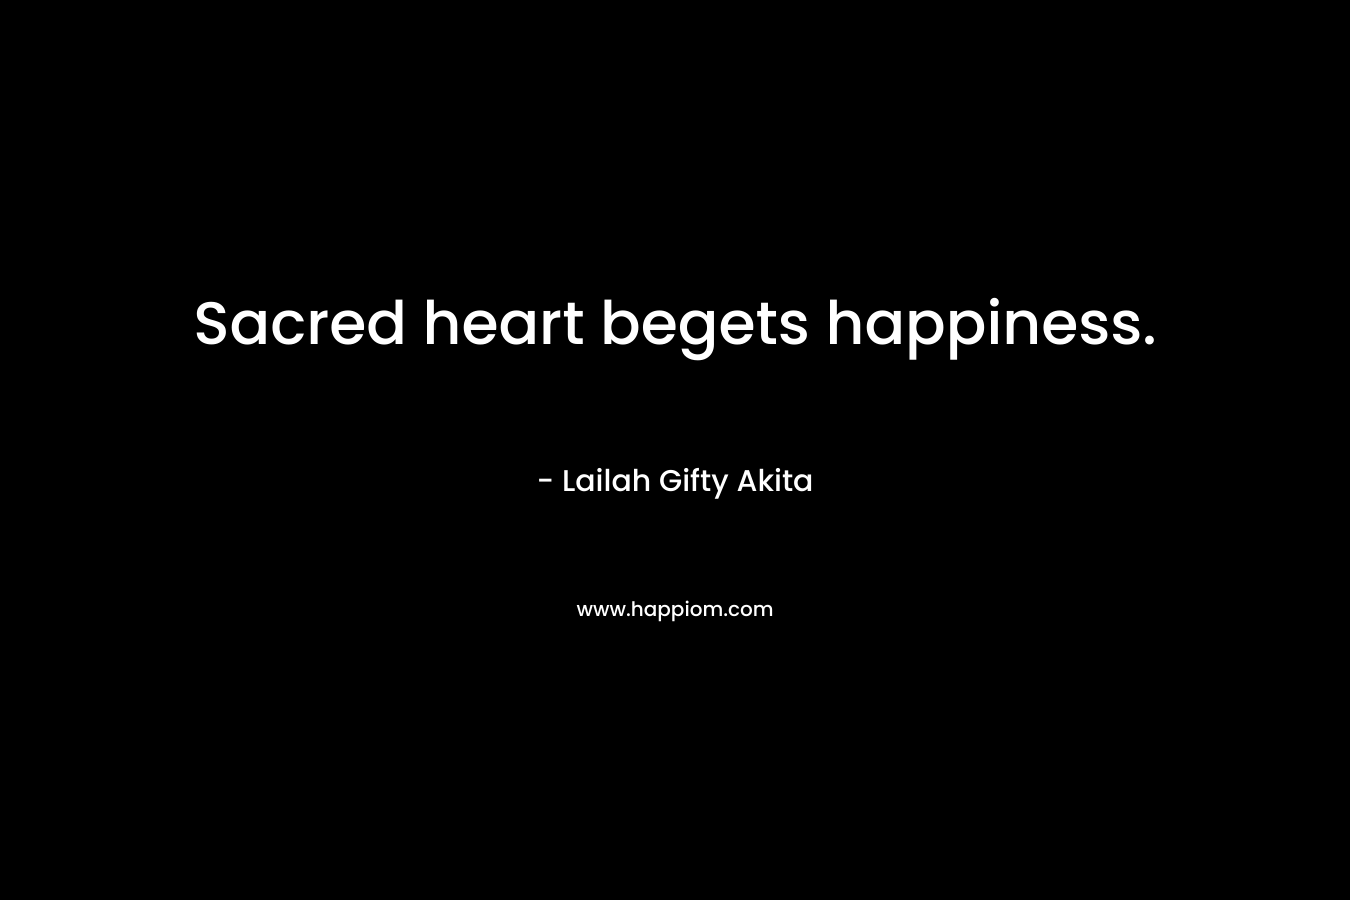 Sacred heart begets happiness. – Lailah Gifty Akita